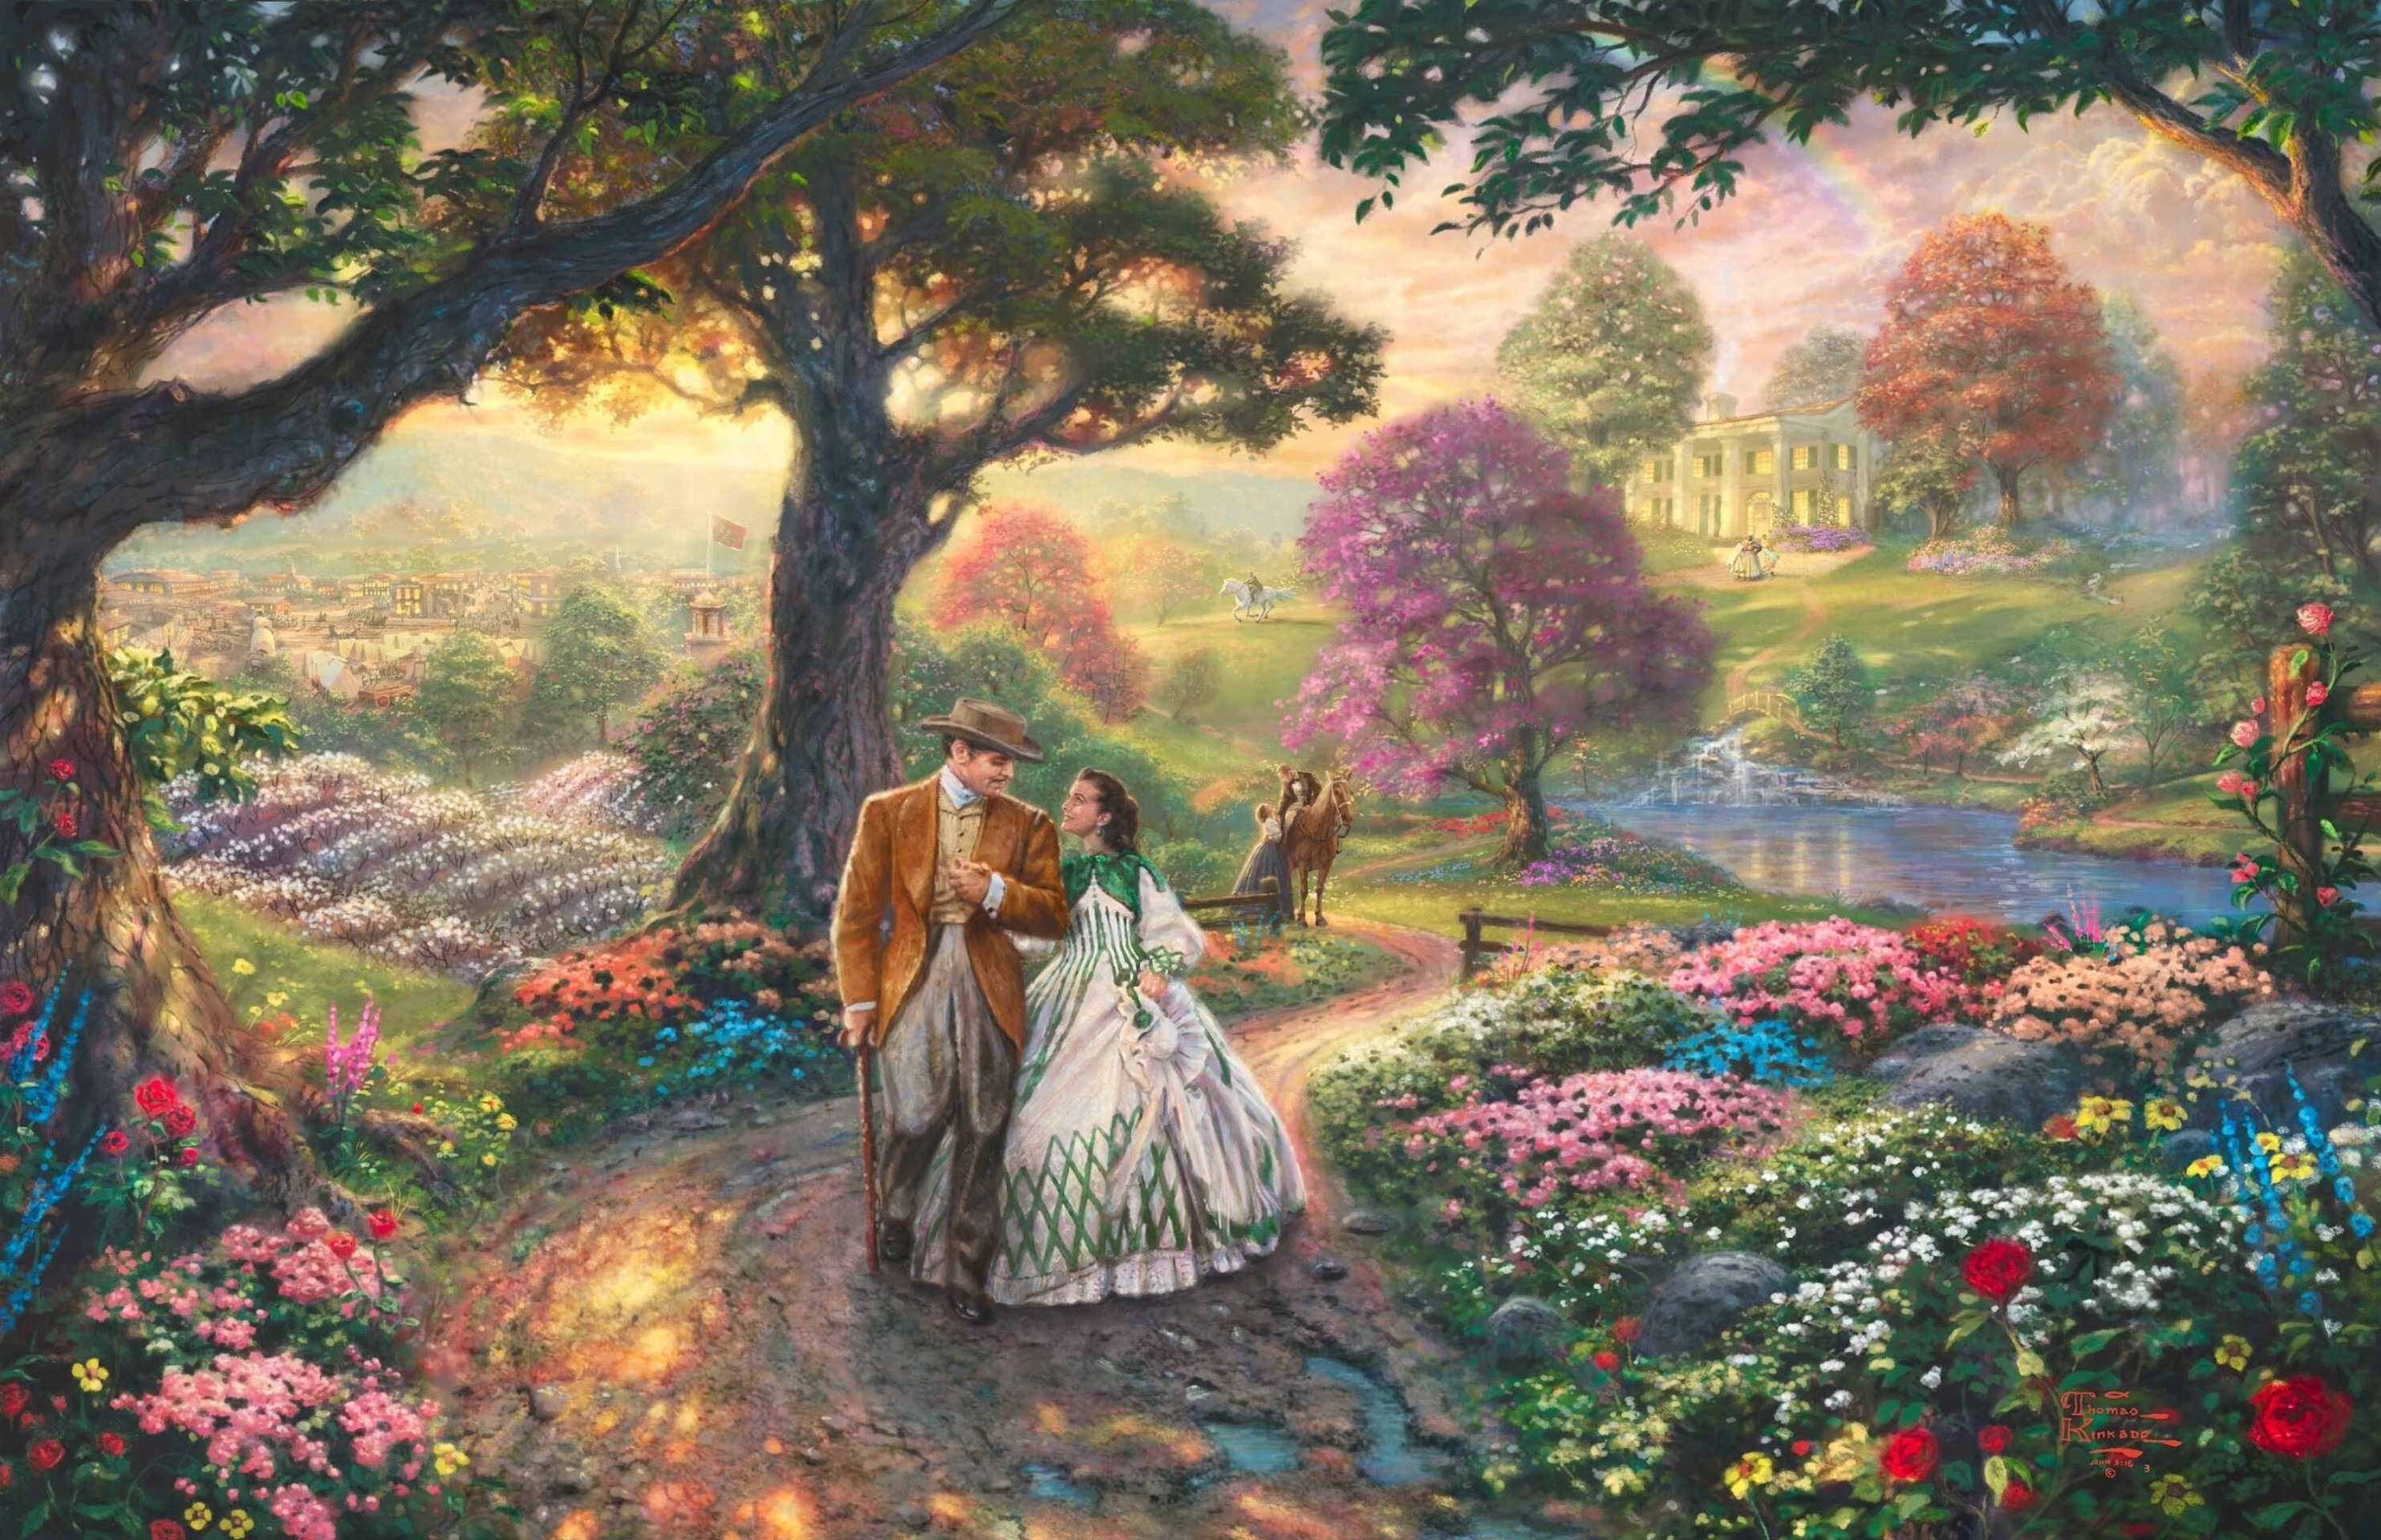 Gone With The Wind Hd Wallpaper - Thomas Kinkade Garden Paintings - HD Wallpaper 